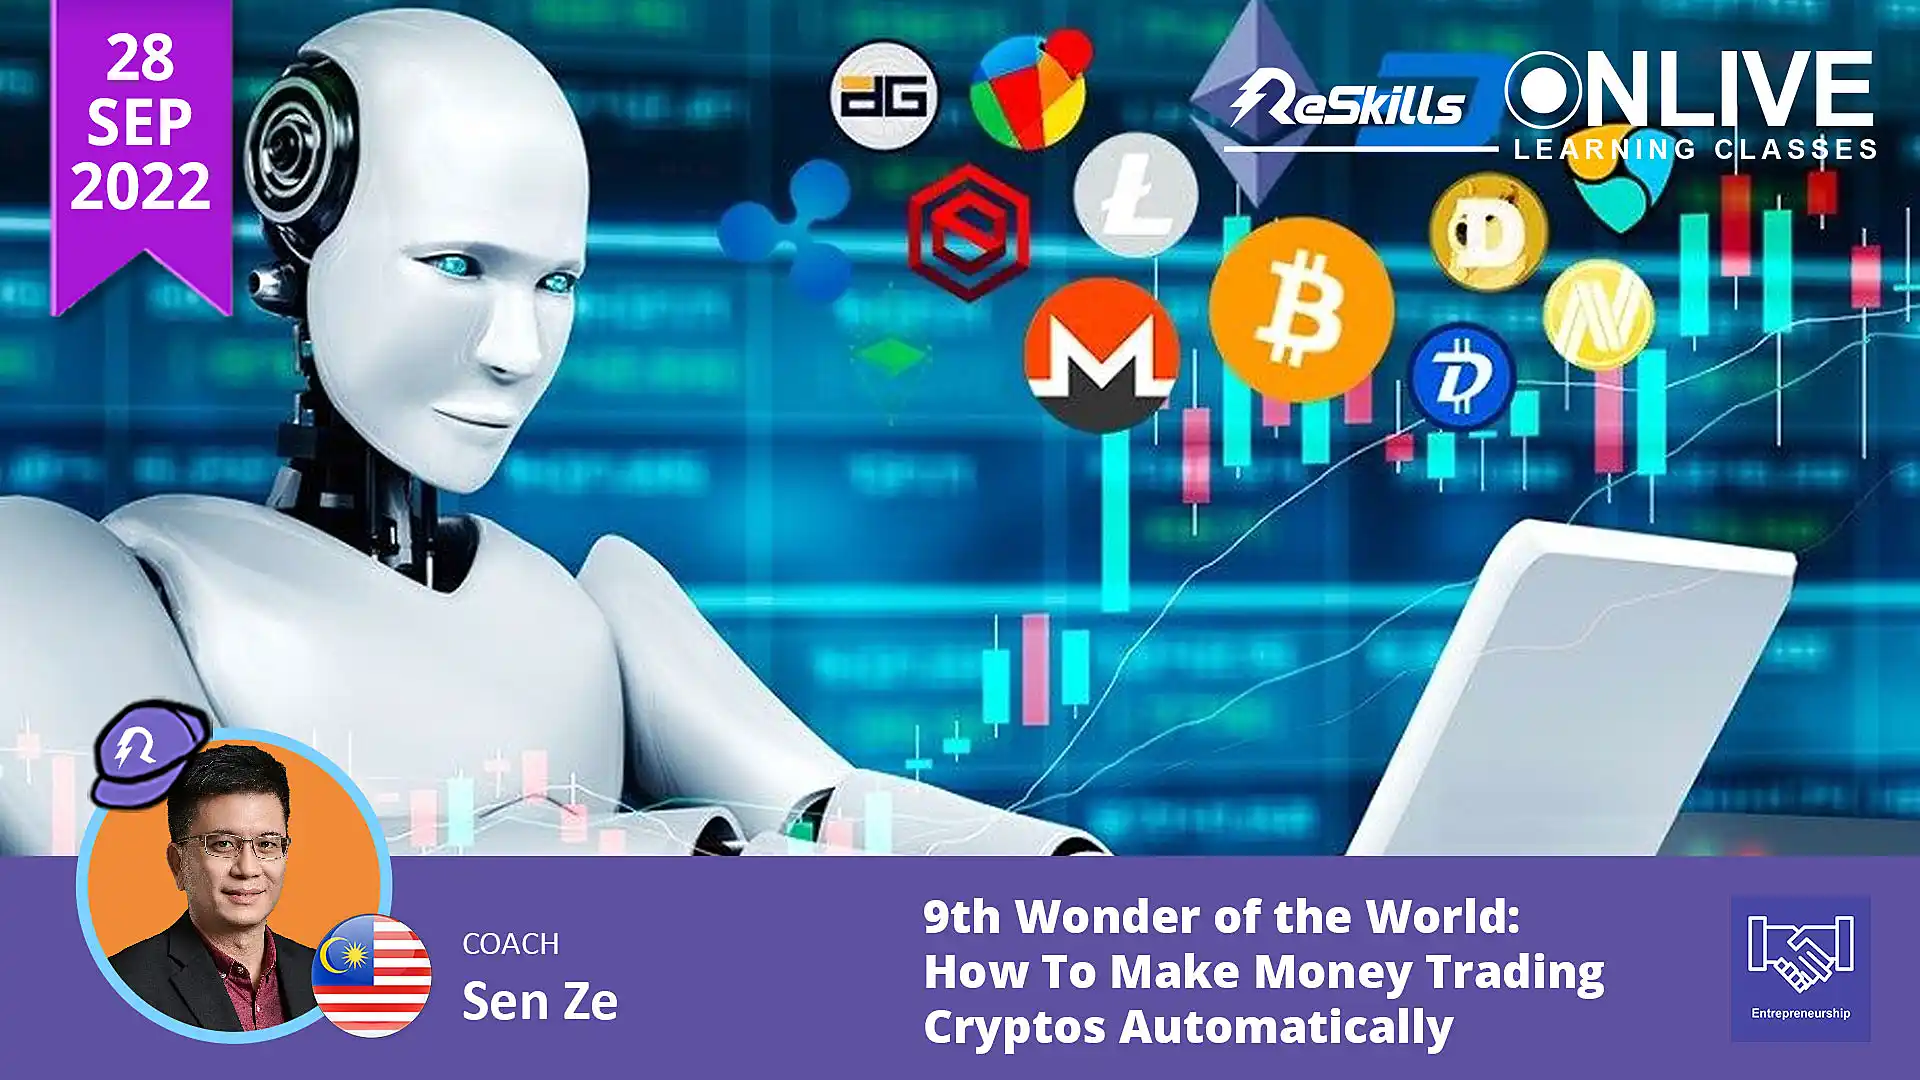 9th Wonder of the World: How To Make Money Trading Cryptos Automatically - ReSkills